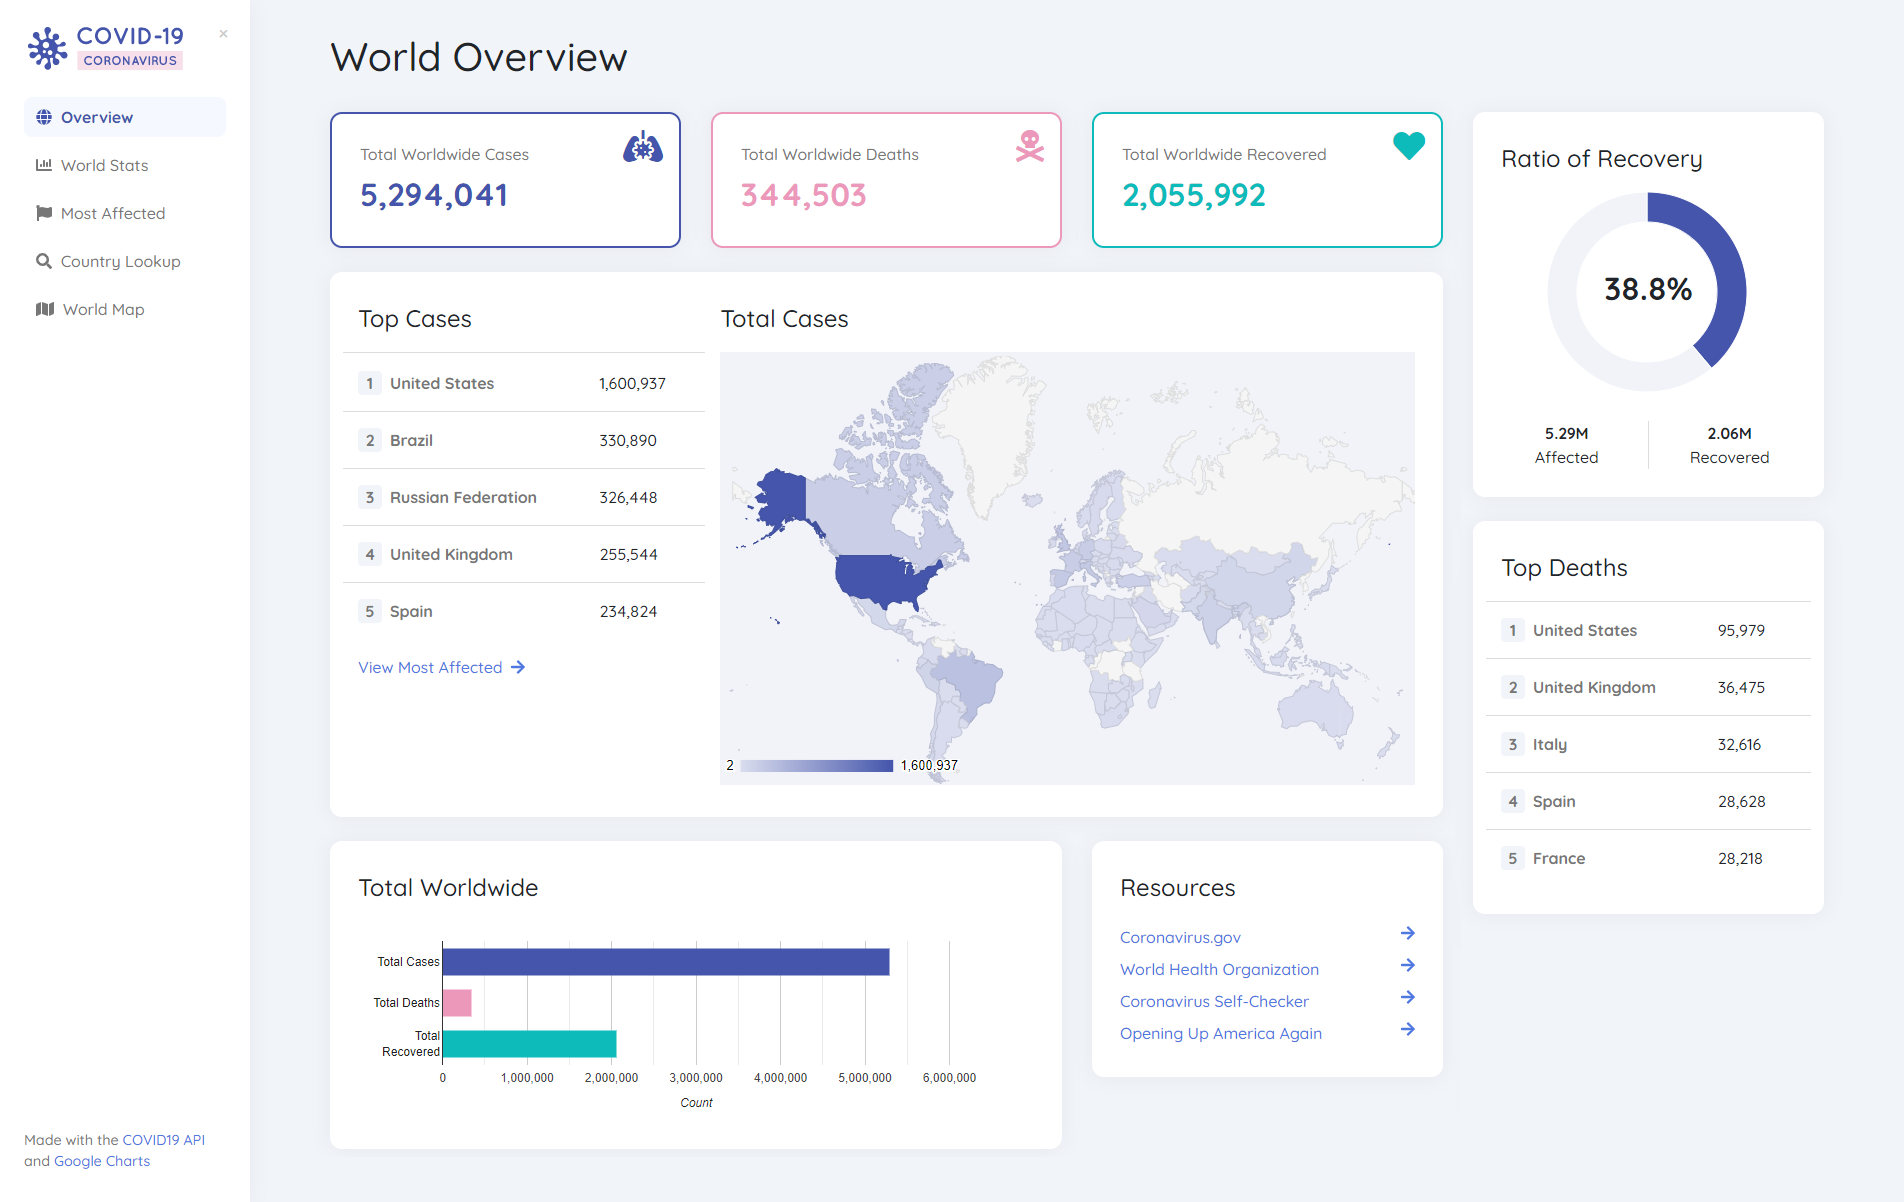 COVID-19 Dashboard Overview